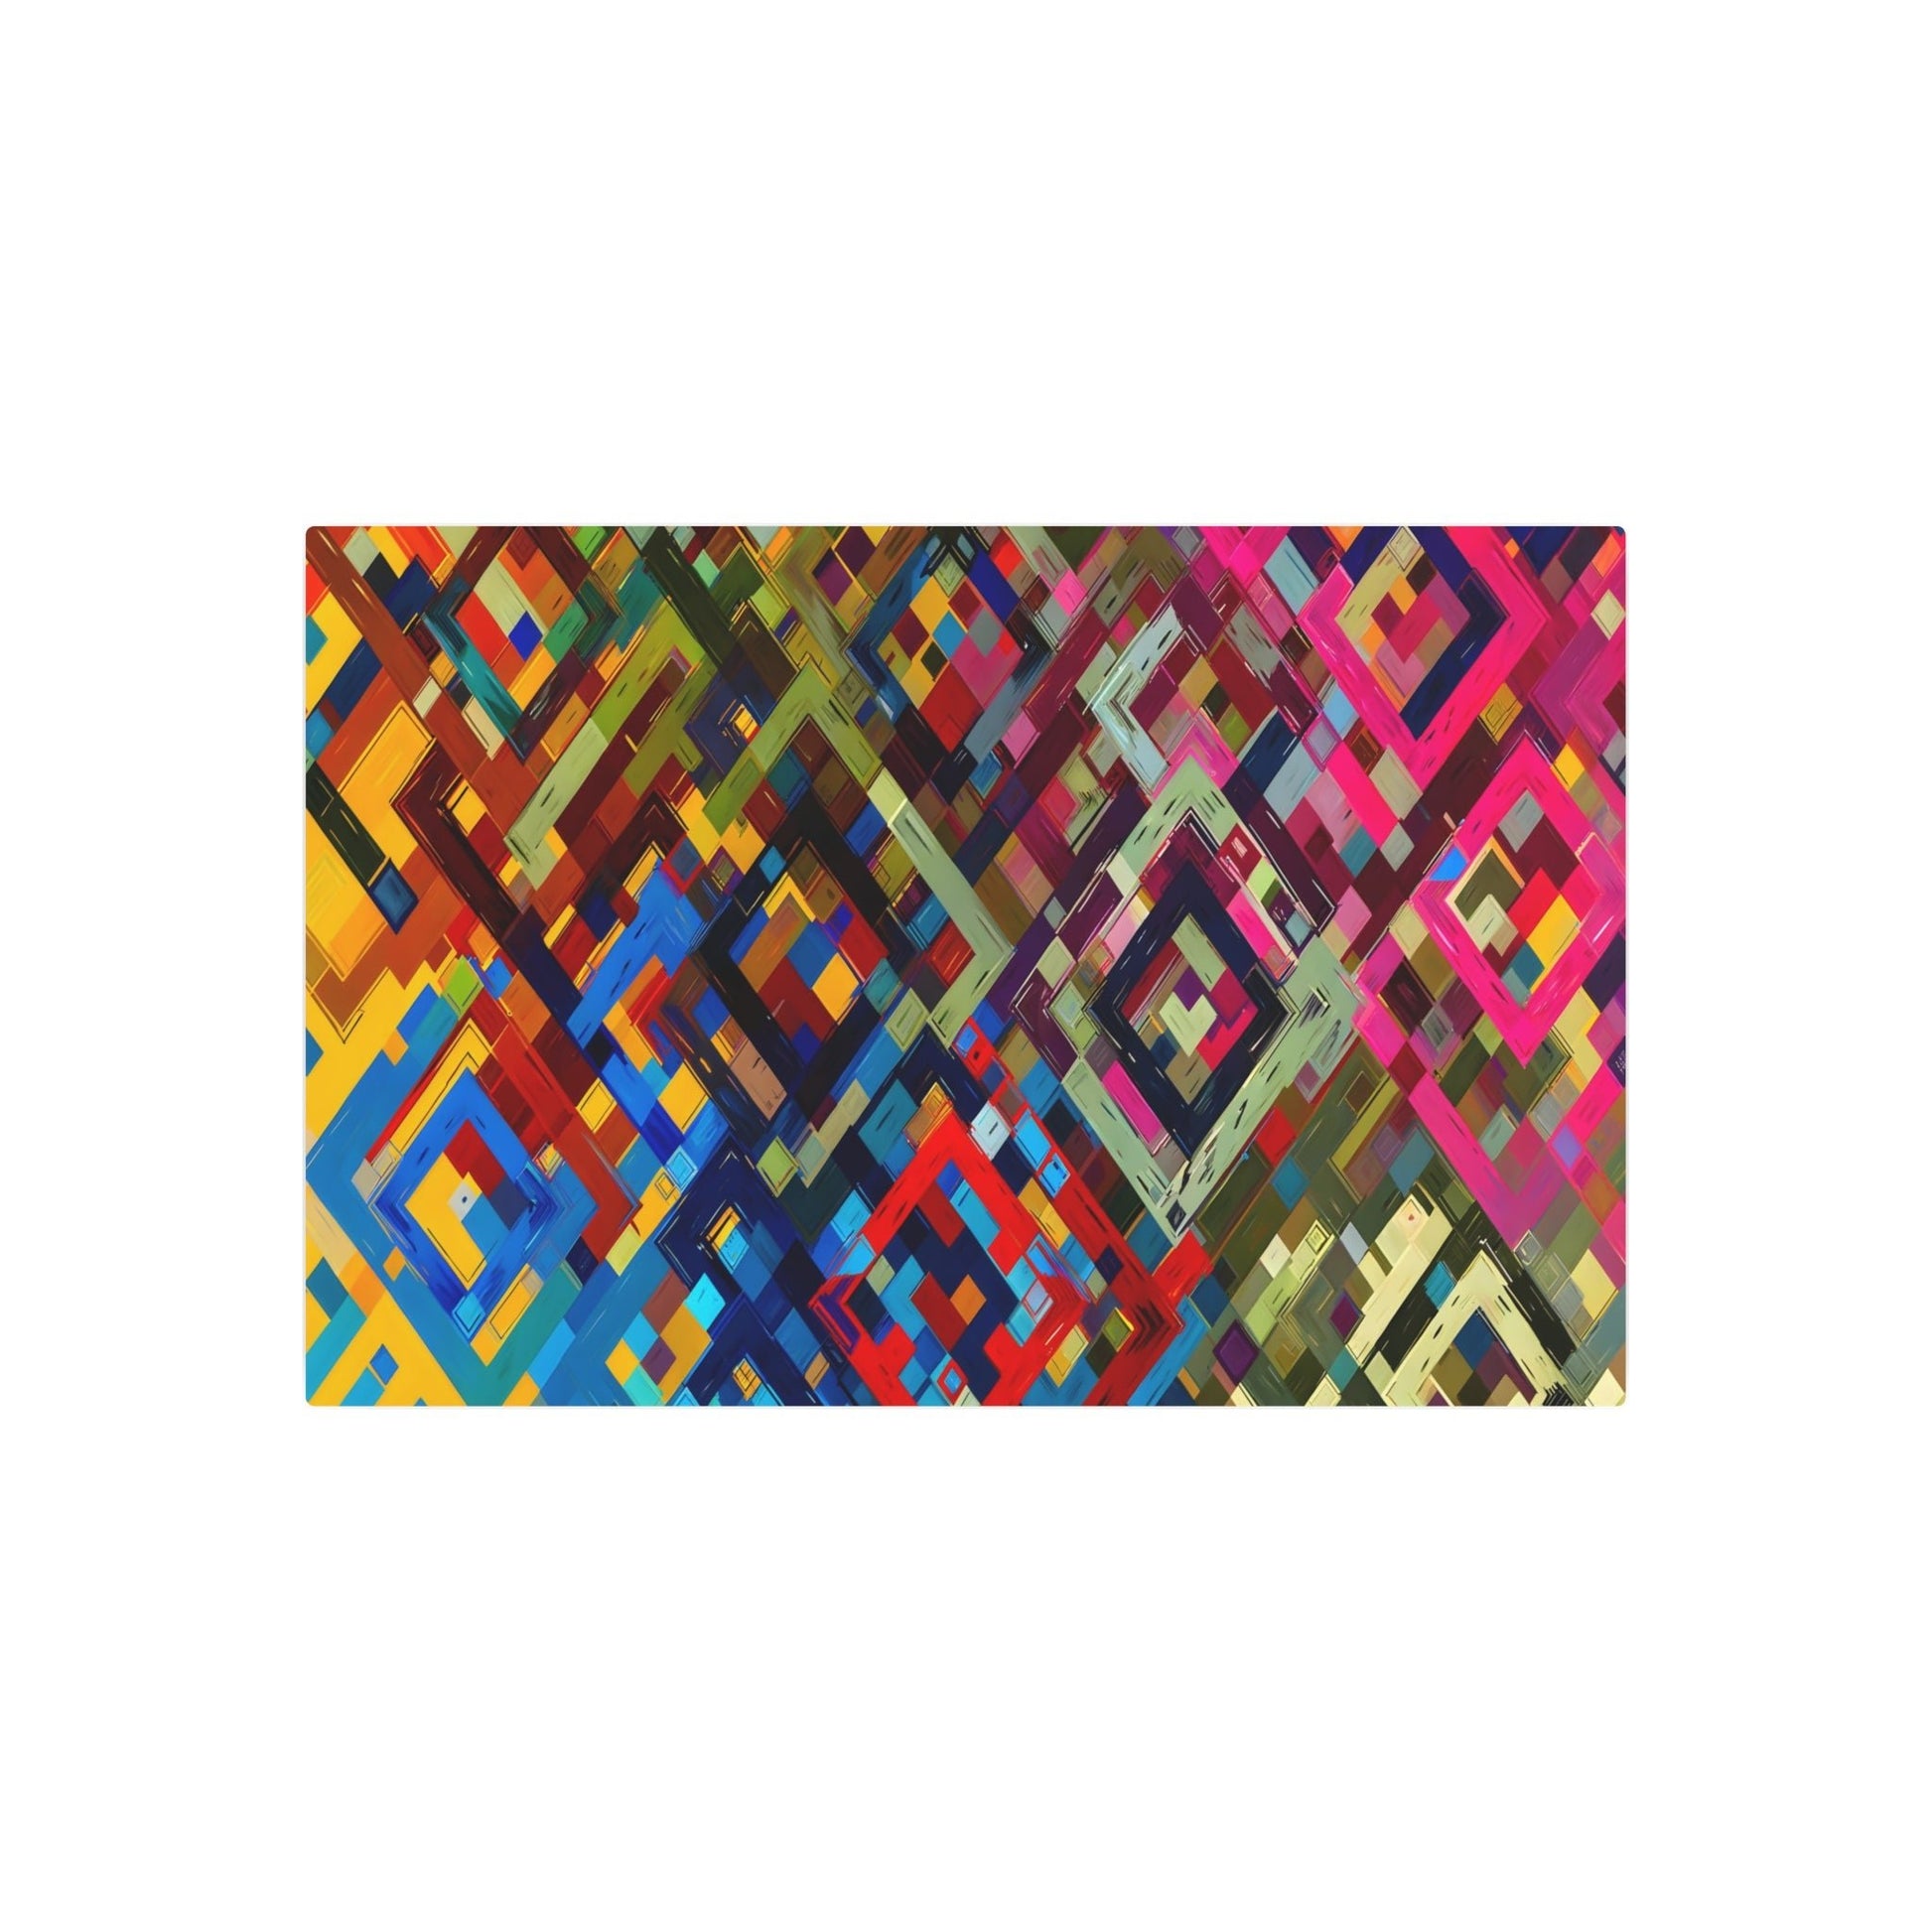 Metal Poster Art | "Vibrant Modern Digital Art - Geometric Shapes & Bold Colors in Contemporary Style Abstract Patterns" - Metal Poster Art 36″ x 24″ (Horizontal) 0.12''